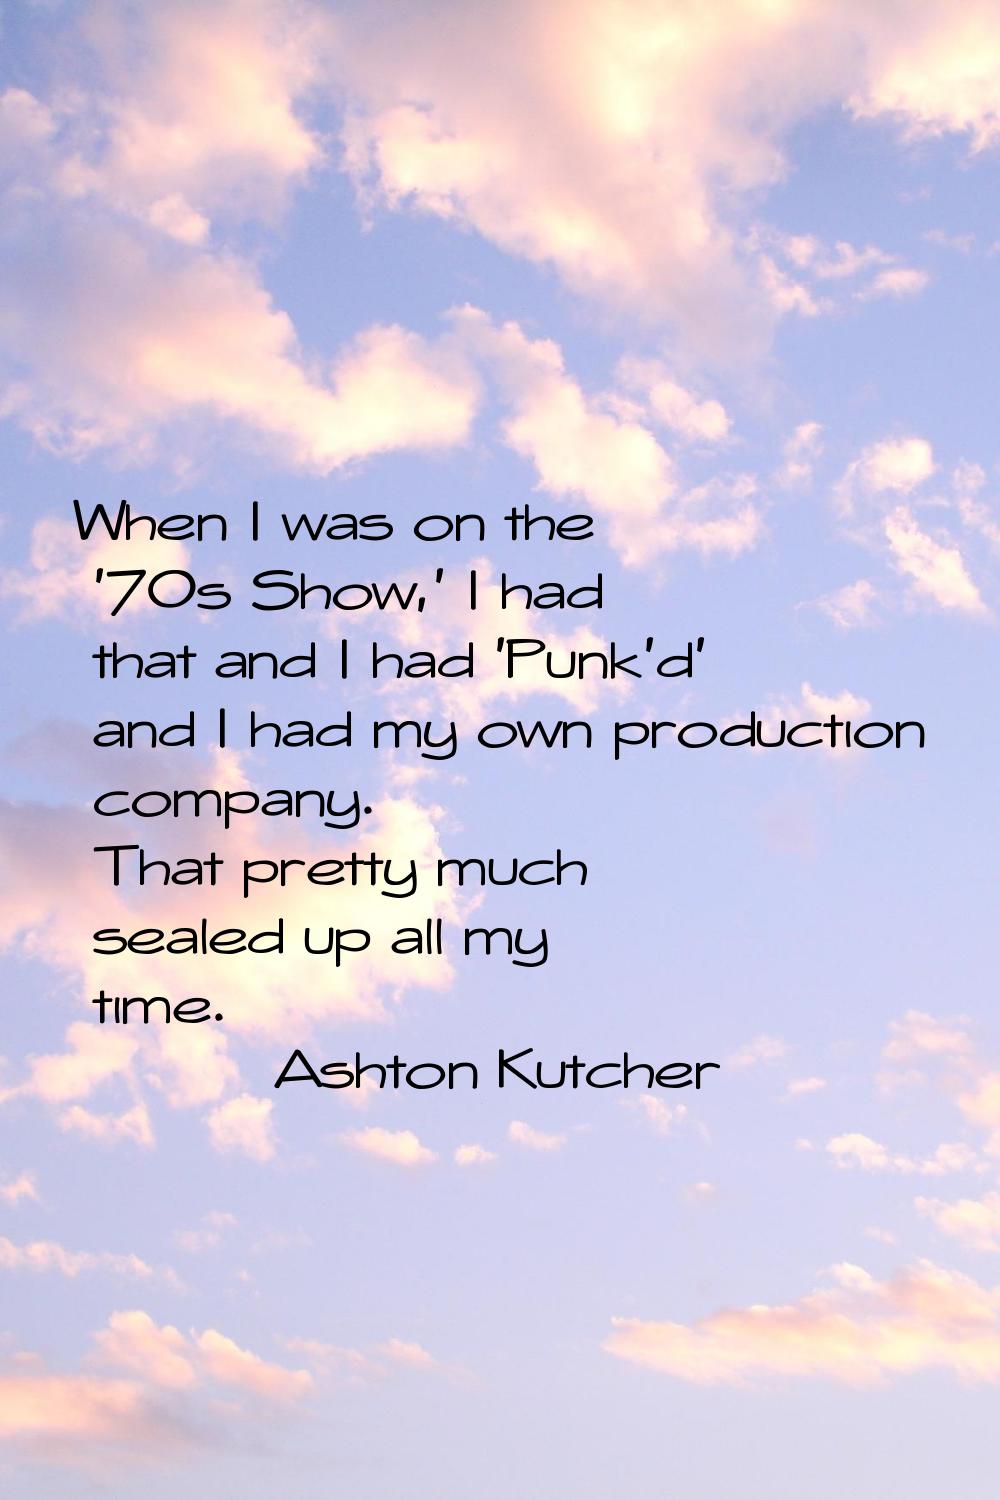 When I was on the '70s Show,' I had that and I had 'Punk'd' and I had my own production company. Th